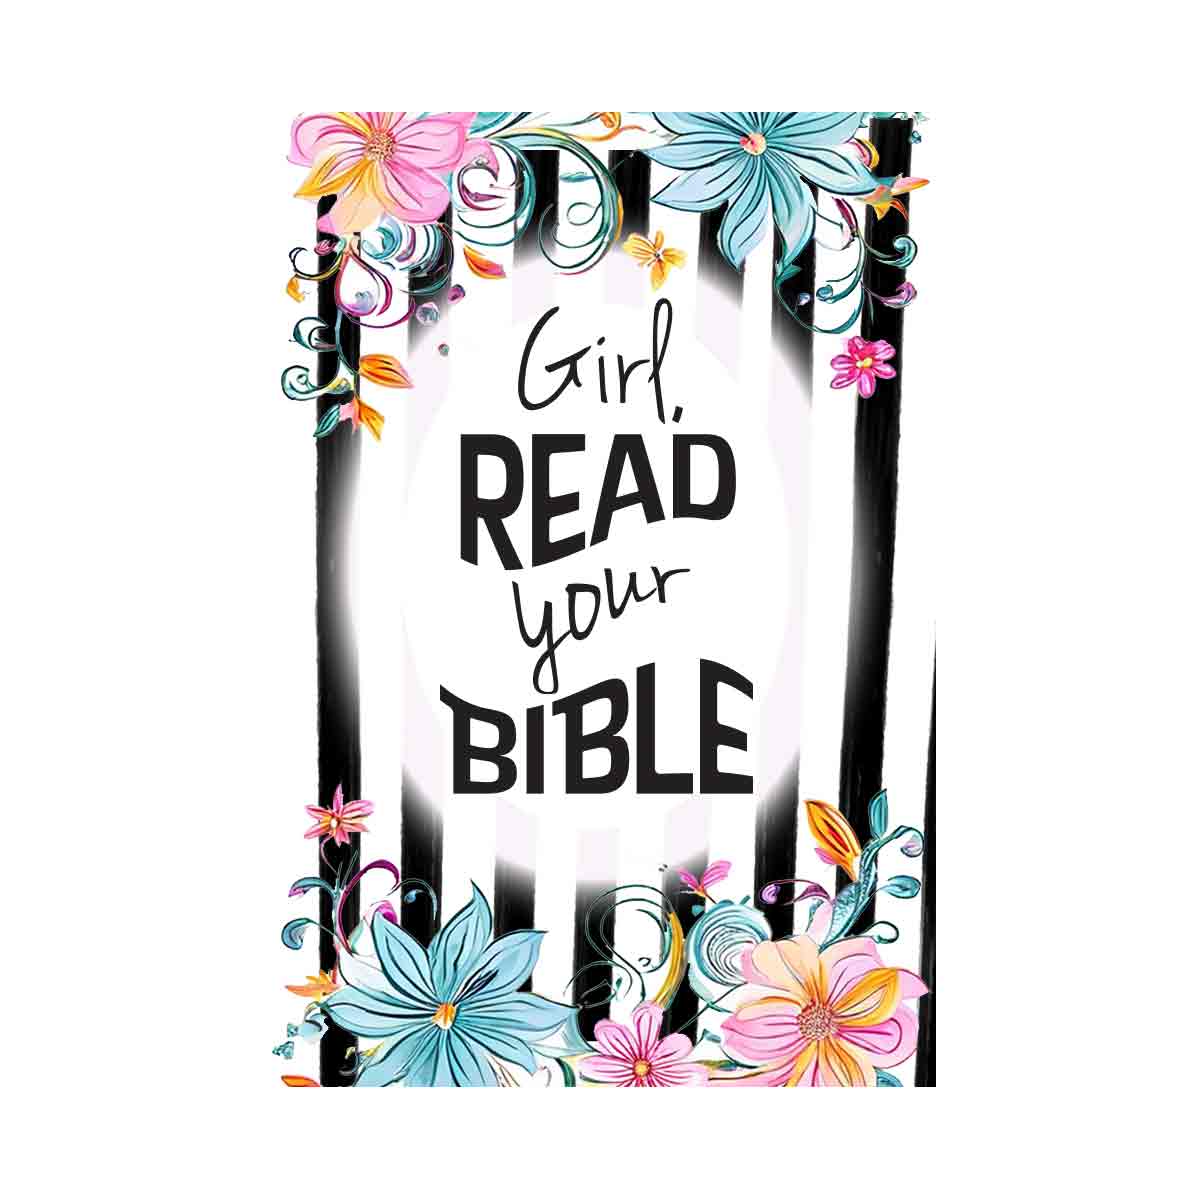 Girl read your Bible